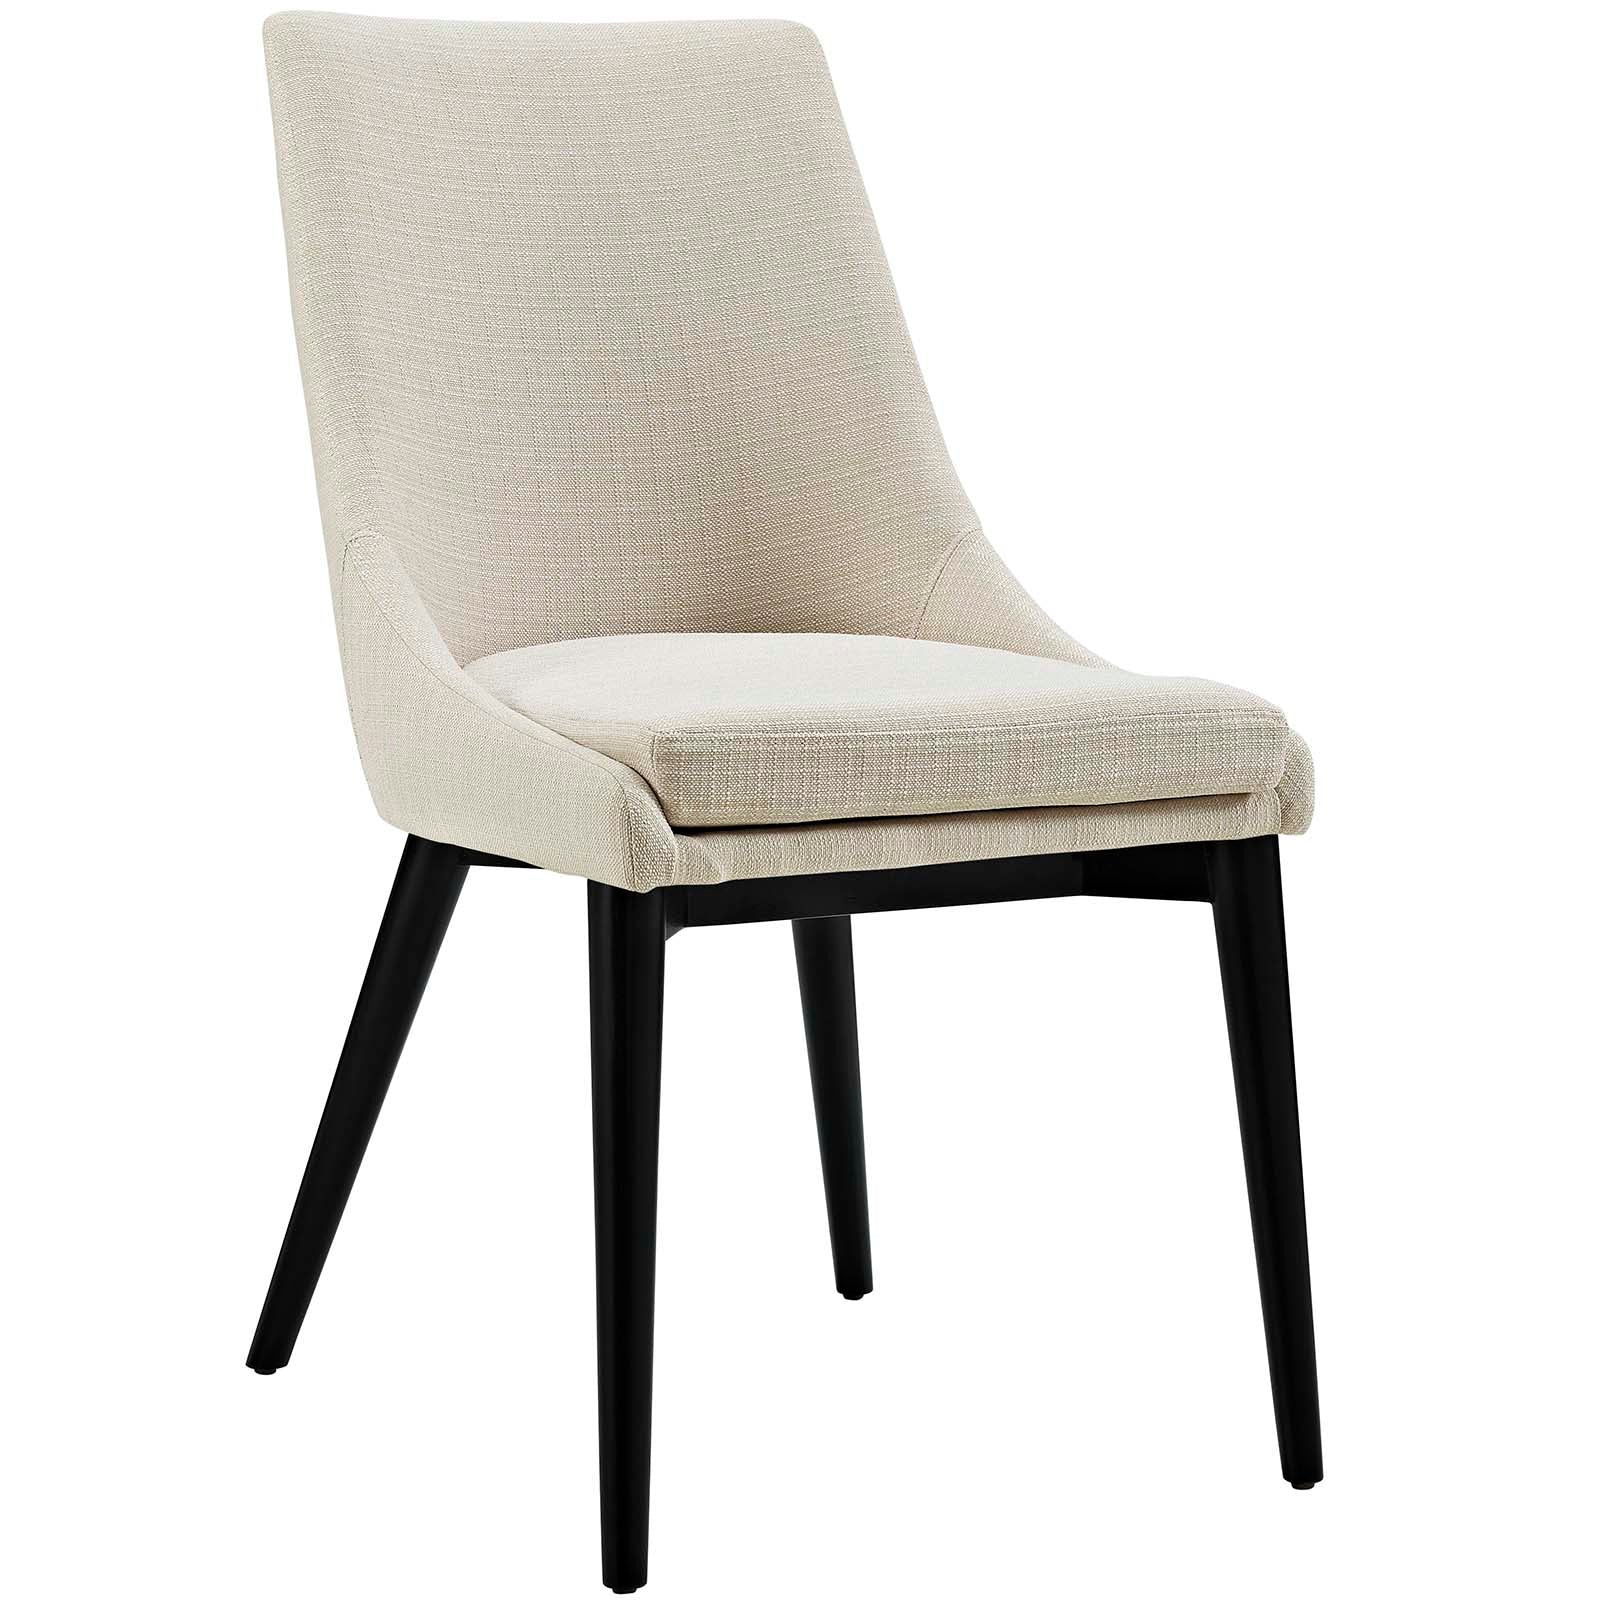 Modway Dining Chairs - Viscount Fabric Dining Chair Beige